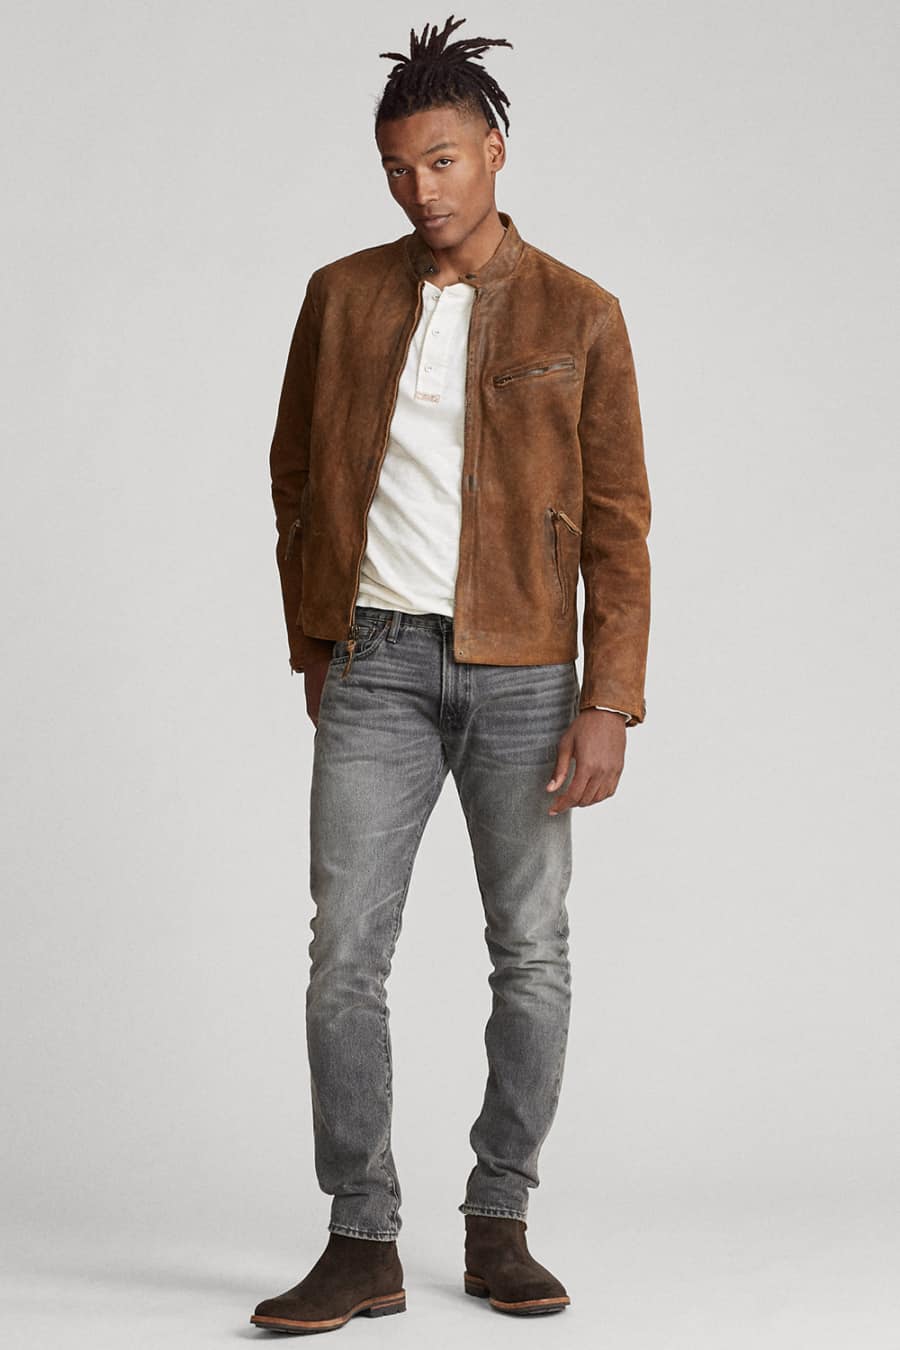 Men's grey jeans with brown suede boots, jacket and white Henley shirt outfit